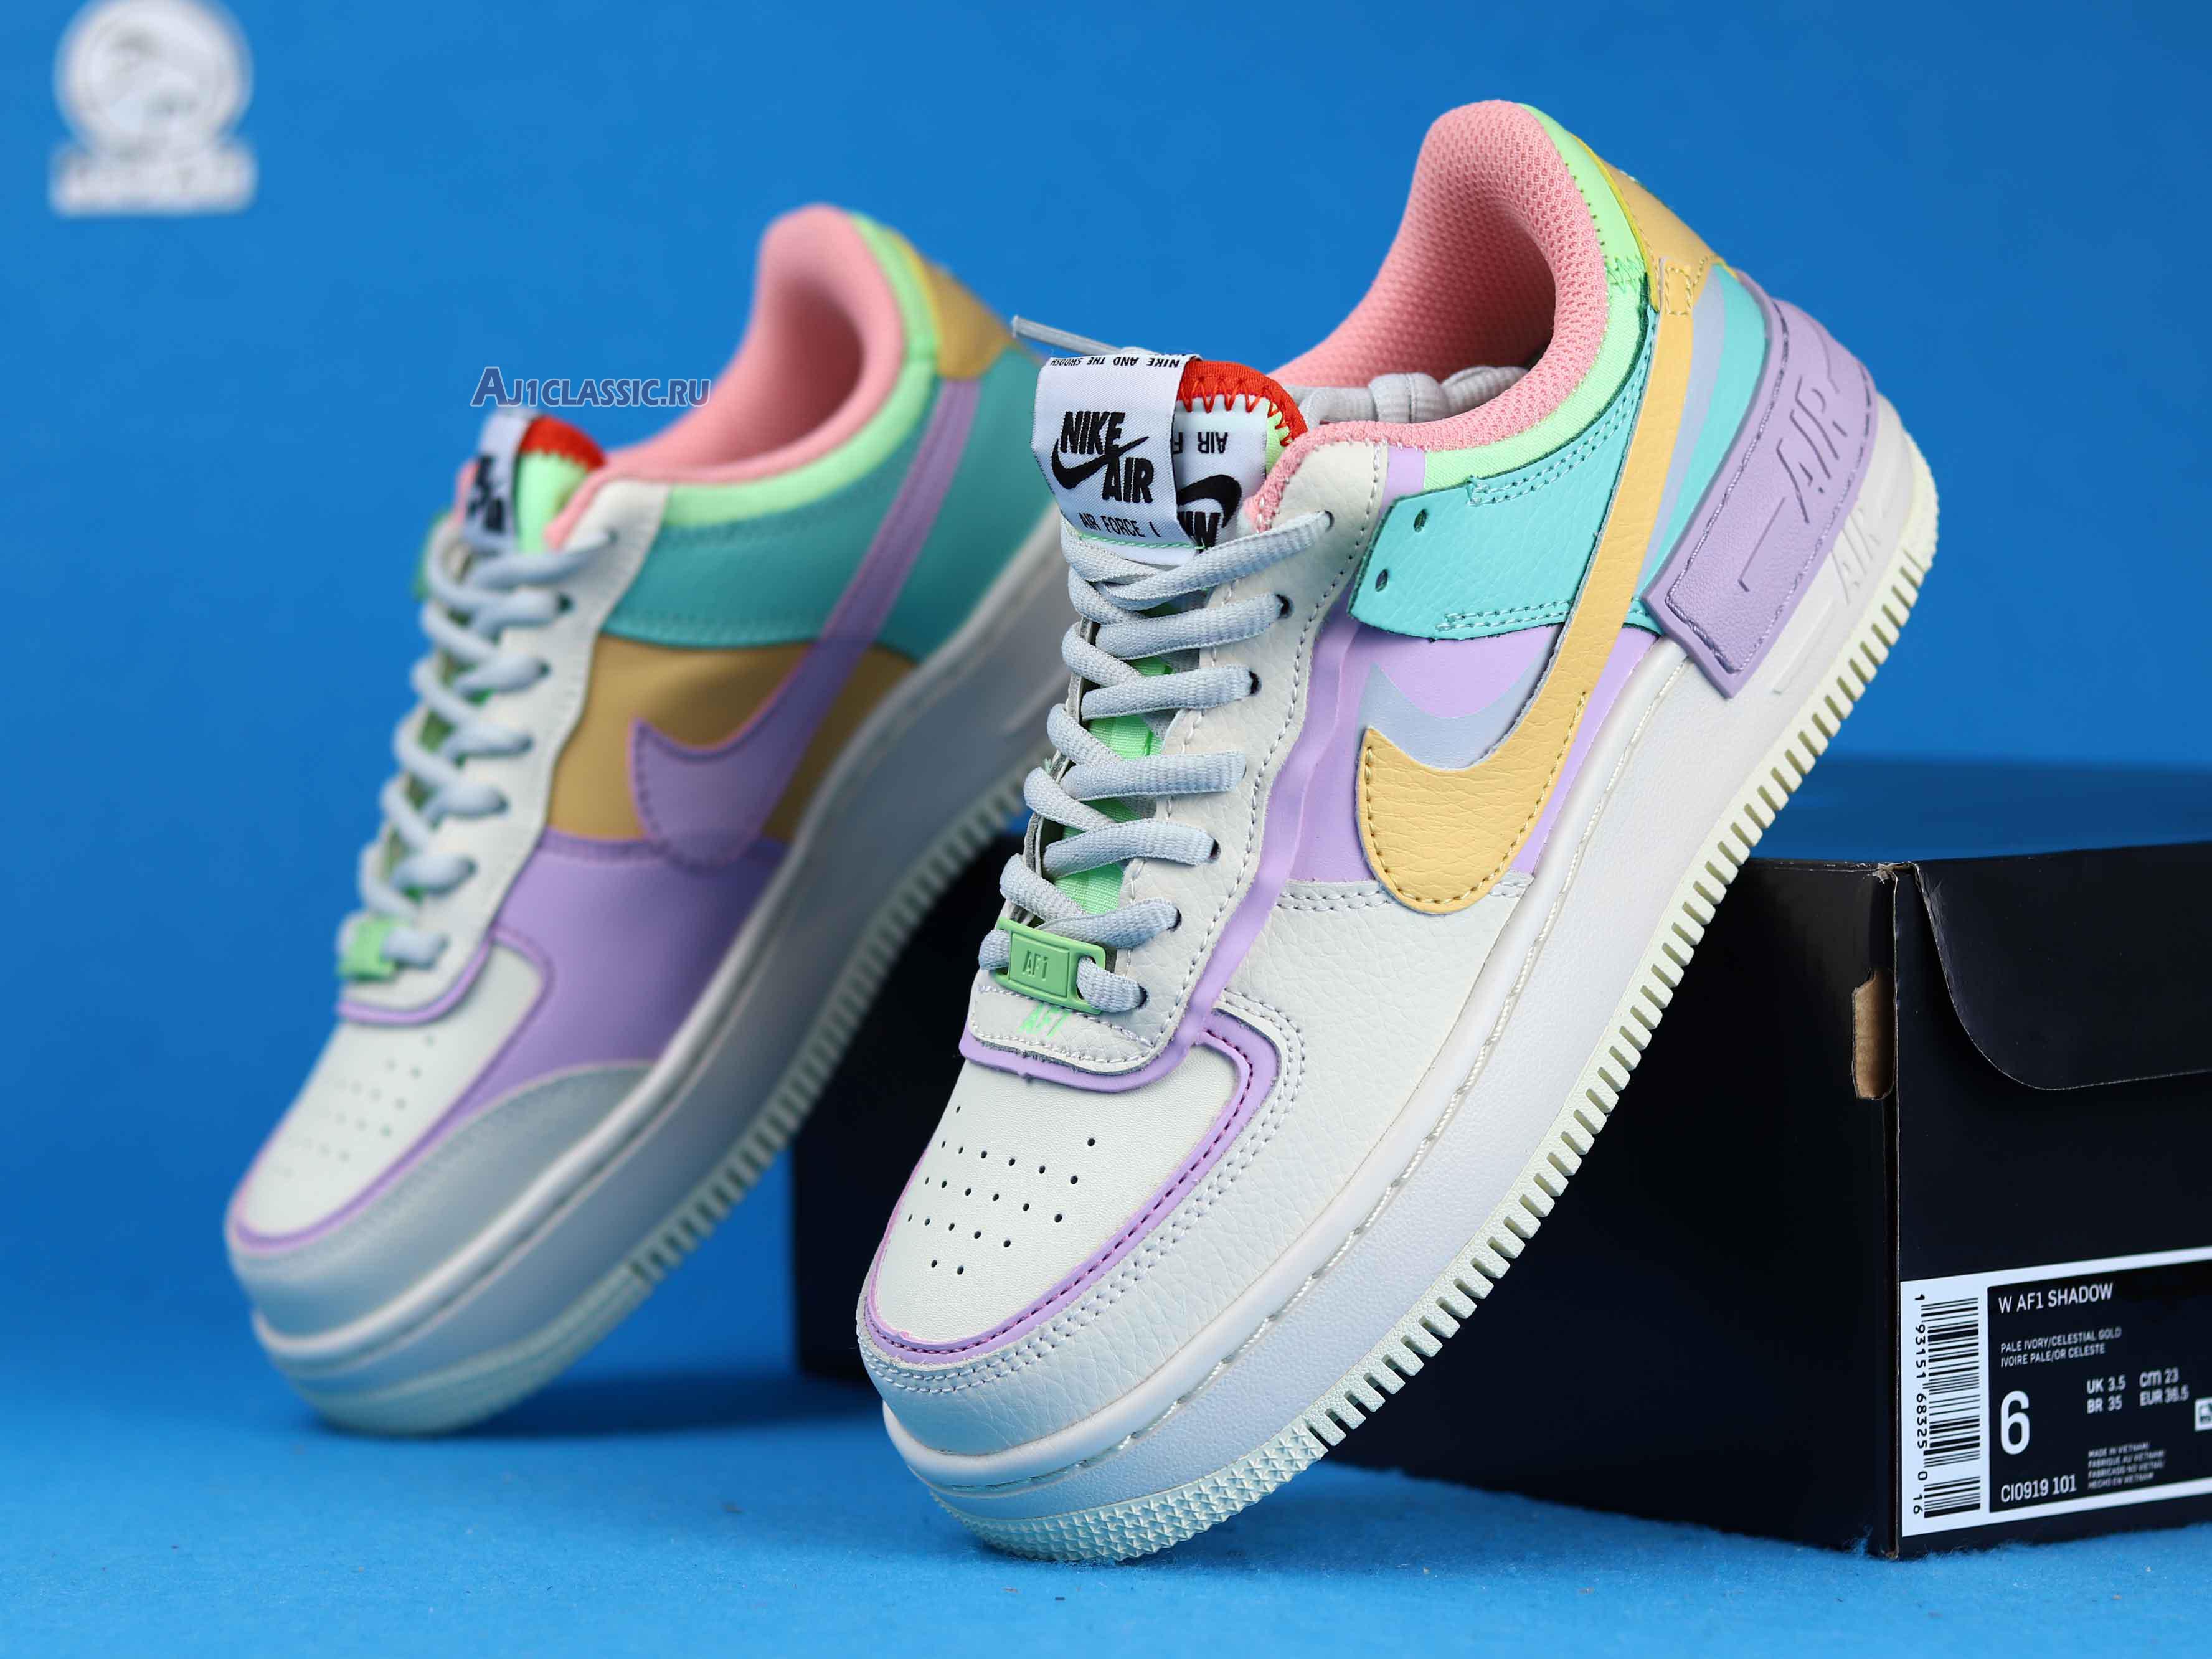 Nike Wmns Air Force 1 Low Shadow Pale Ivory CI0919-101 Pale Ivory/Celestial Gold/Tropical Twist Sneakers